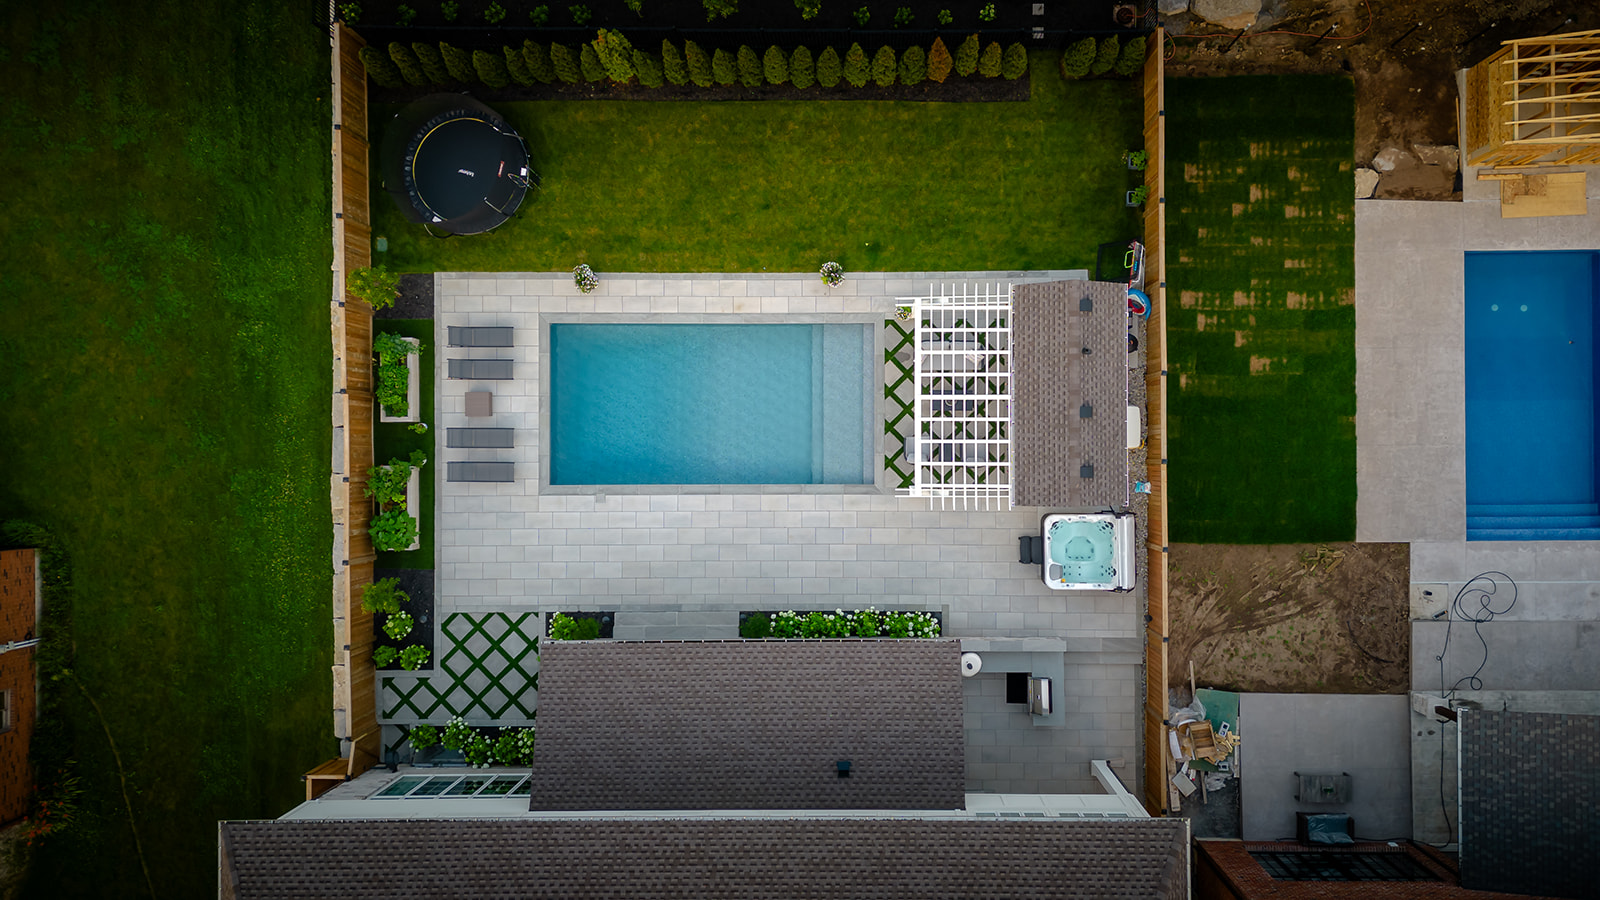 top-down view of the backyard with an inground pool.